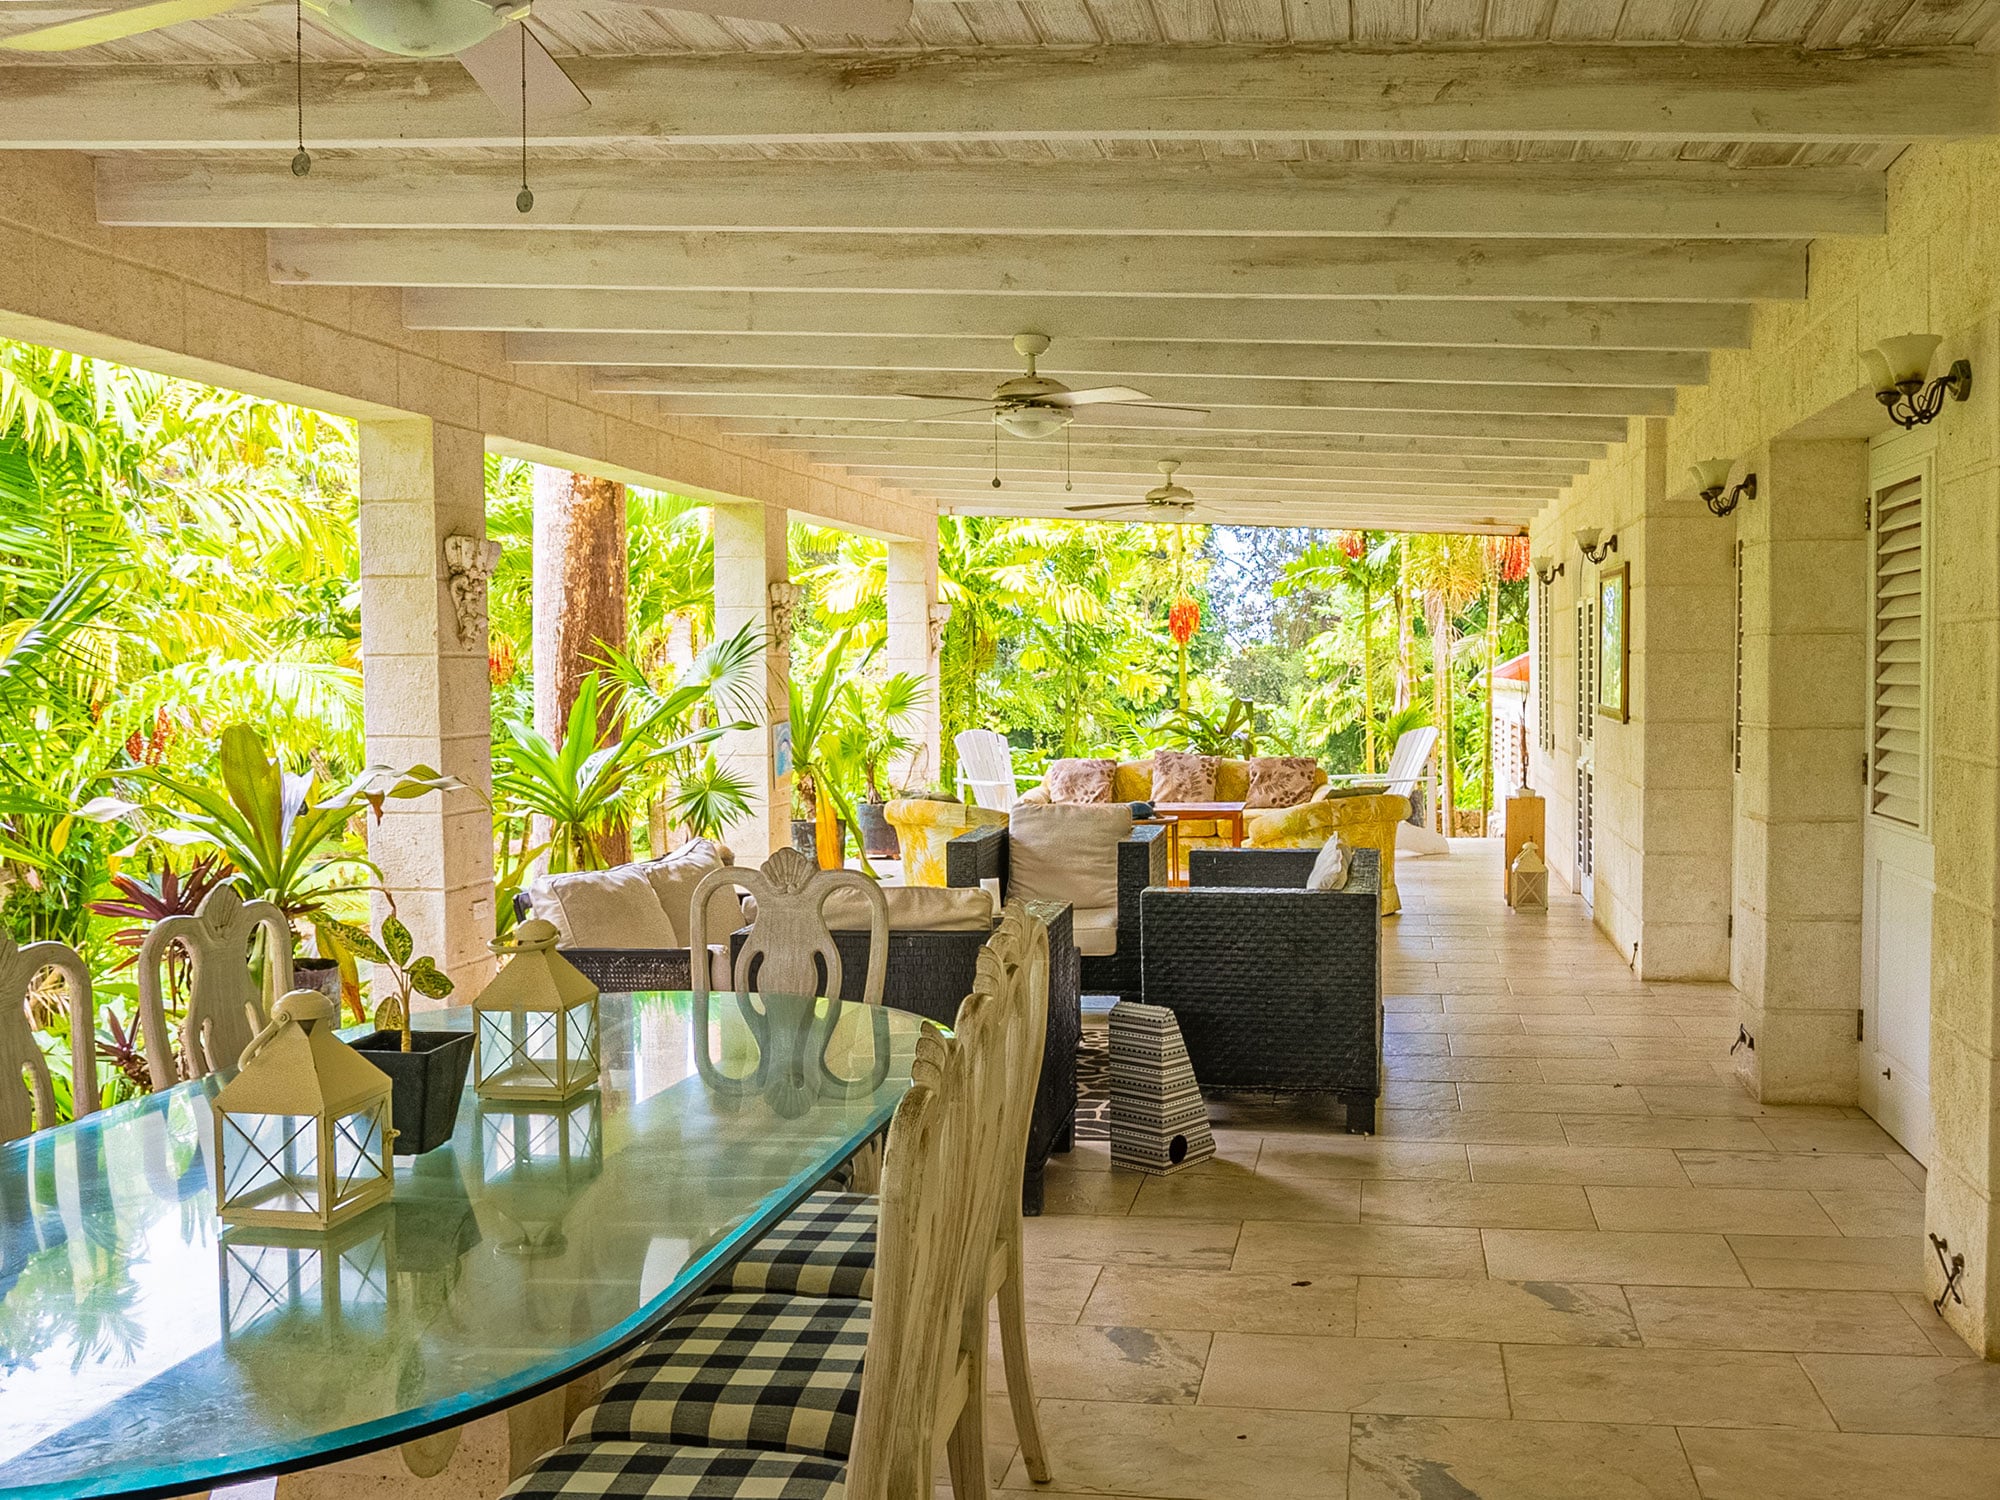 The patio of the Clifton Hall Great House on the Caribbean island of Barbados.